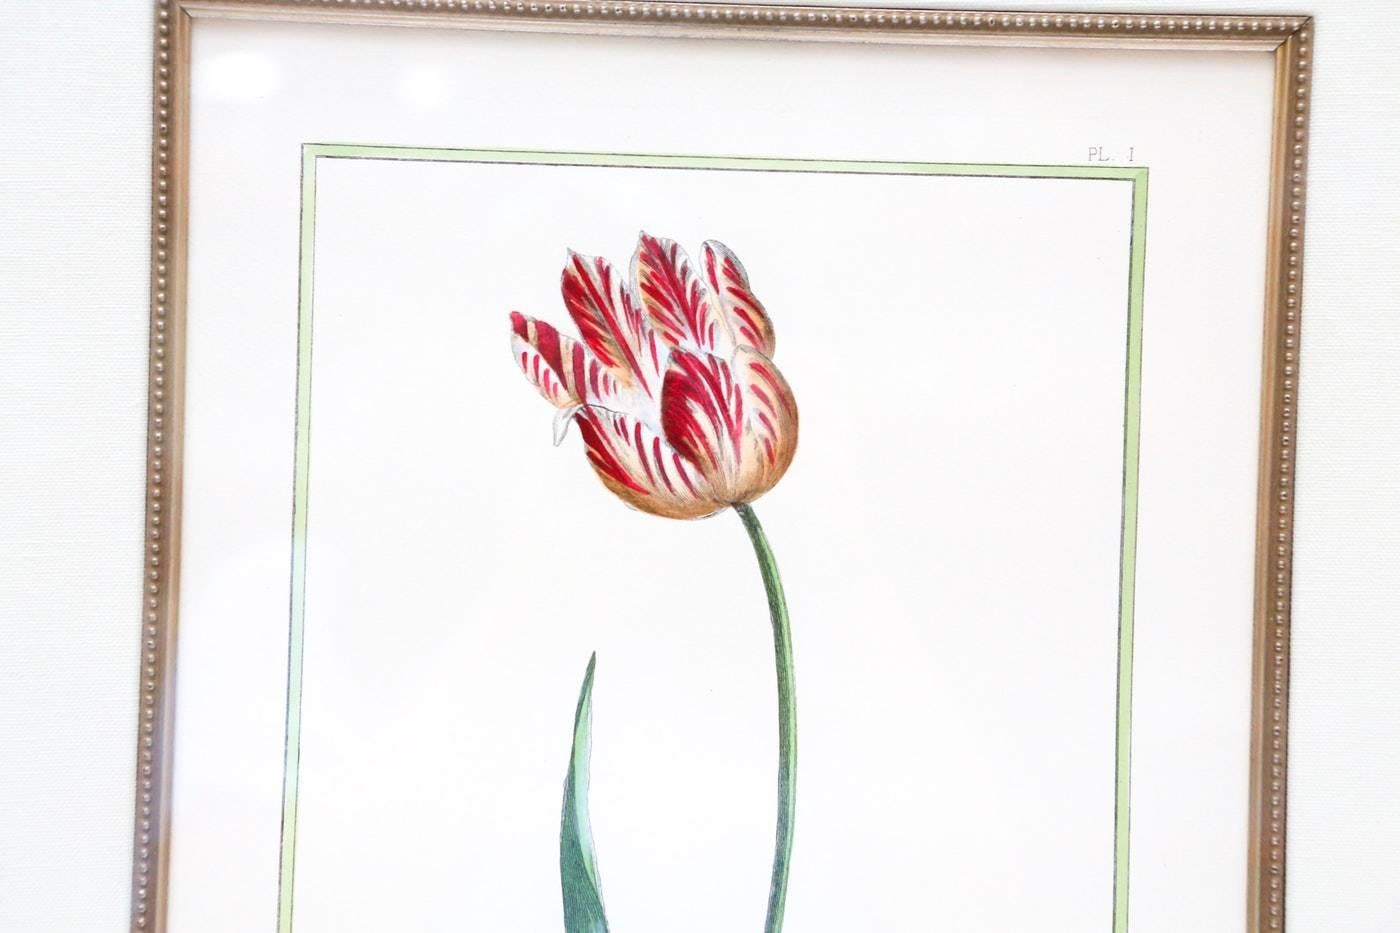 A pair of vintage framed botanical prints of plates. The two plated are title to the centre: La Petite Mignonre, Plate I; and L'Espagnole, Plate III. Each plate depicts a red and white tulip on a green stem with leaves. Both prints are frame in gilt